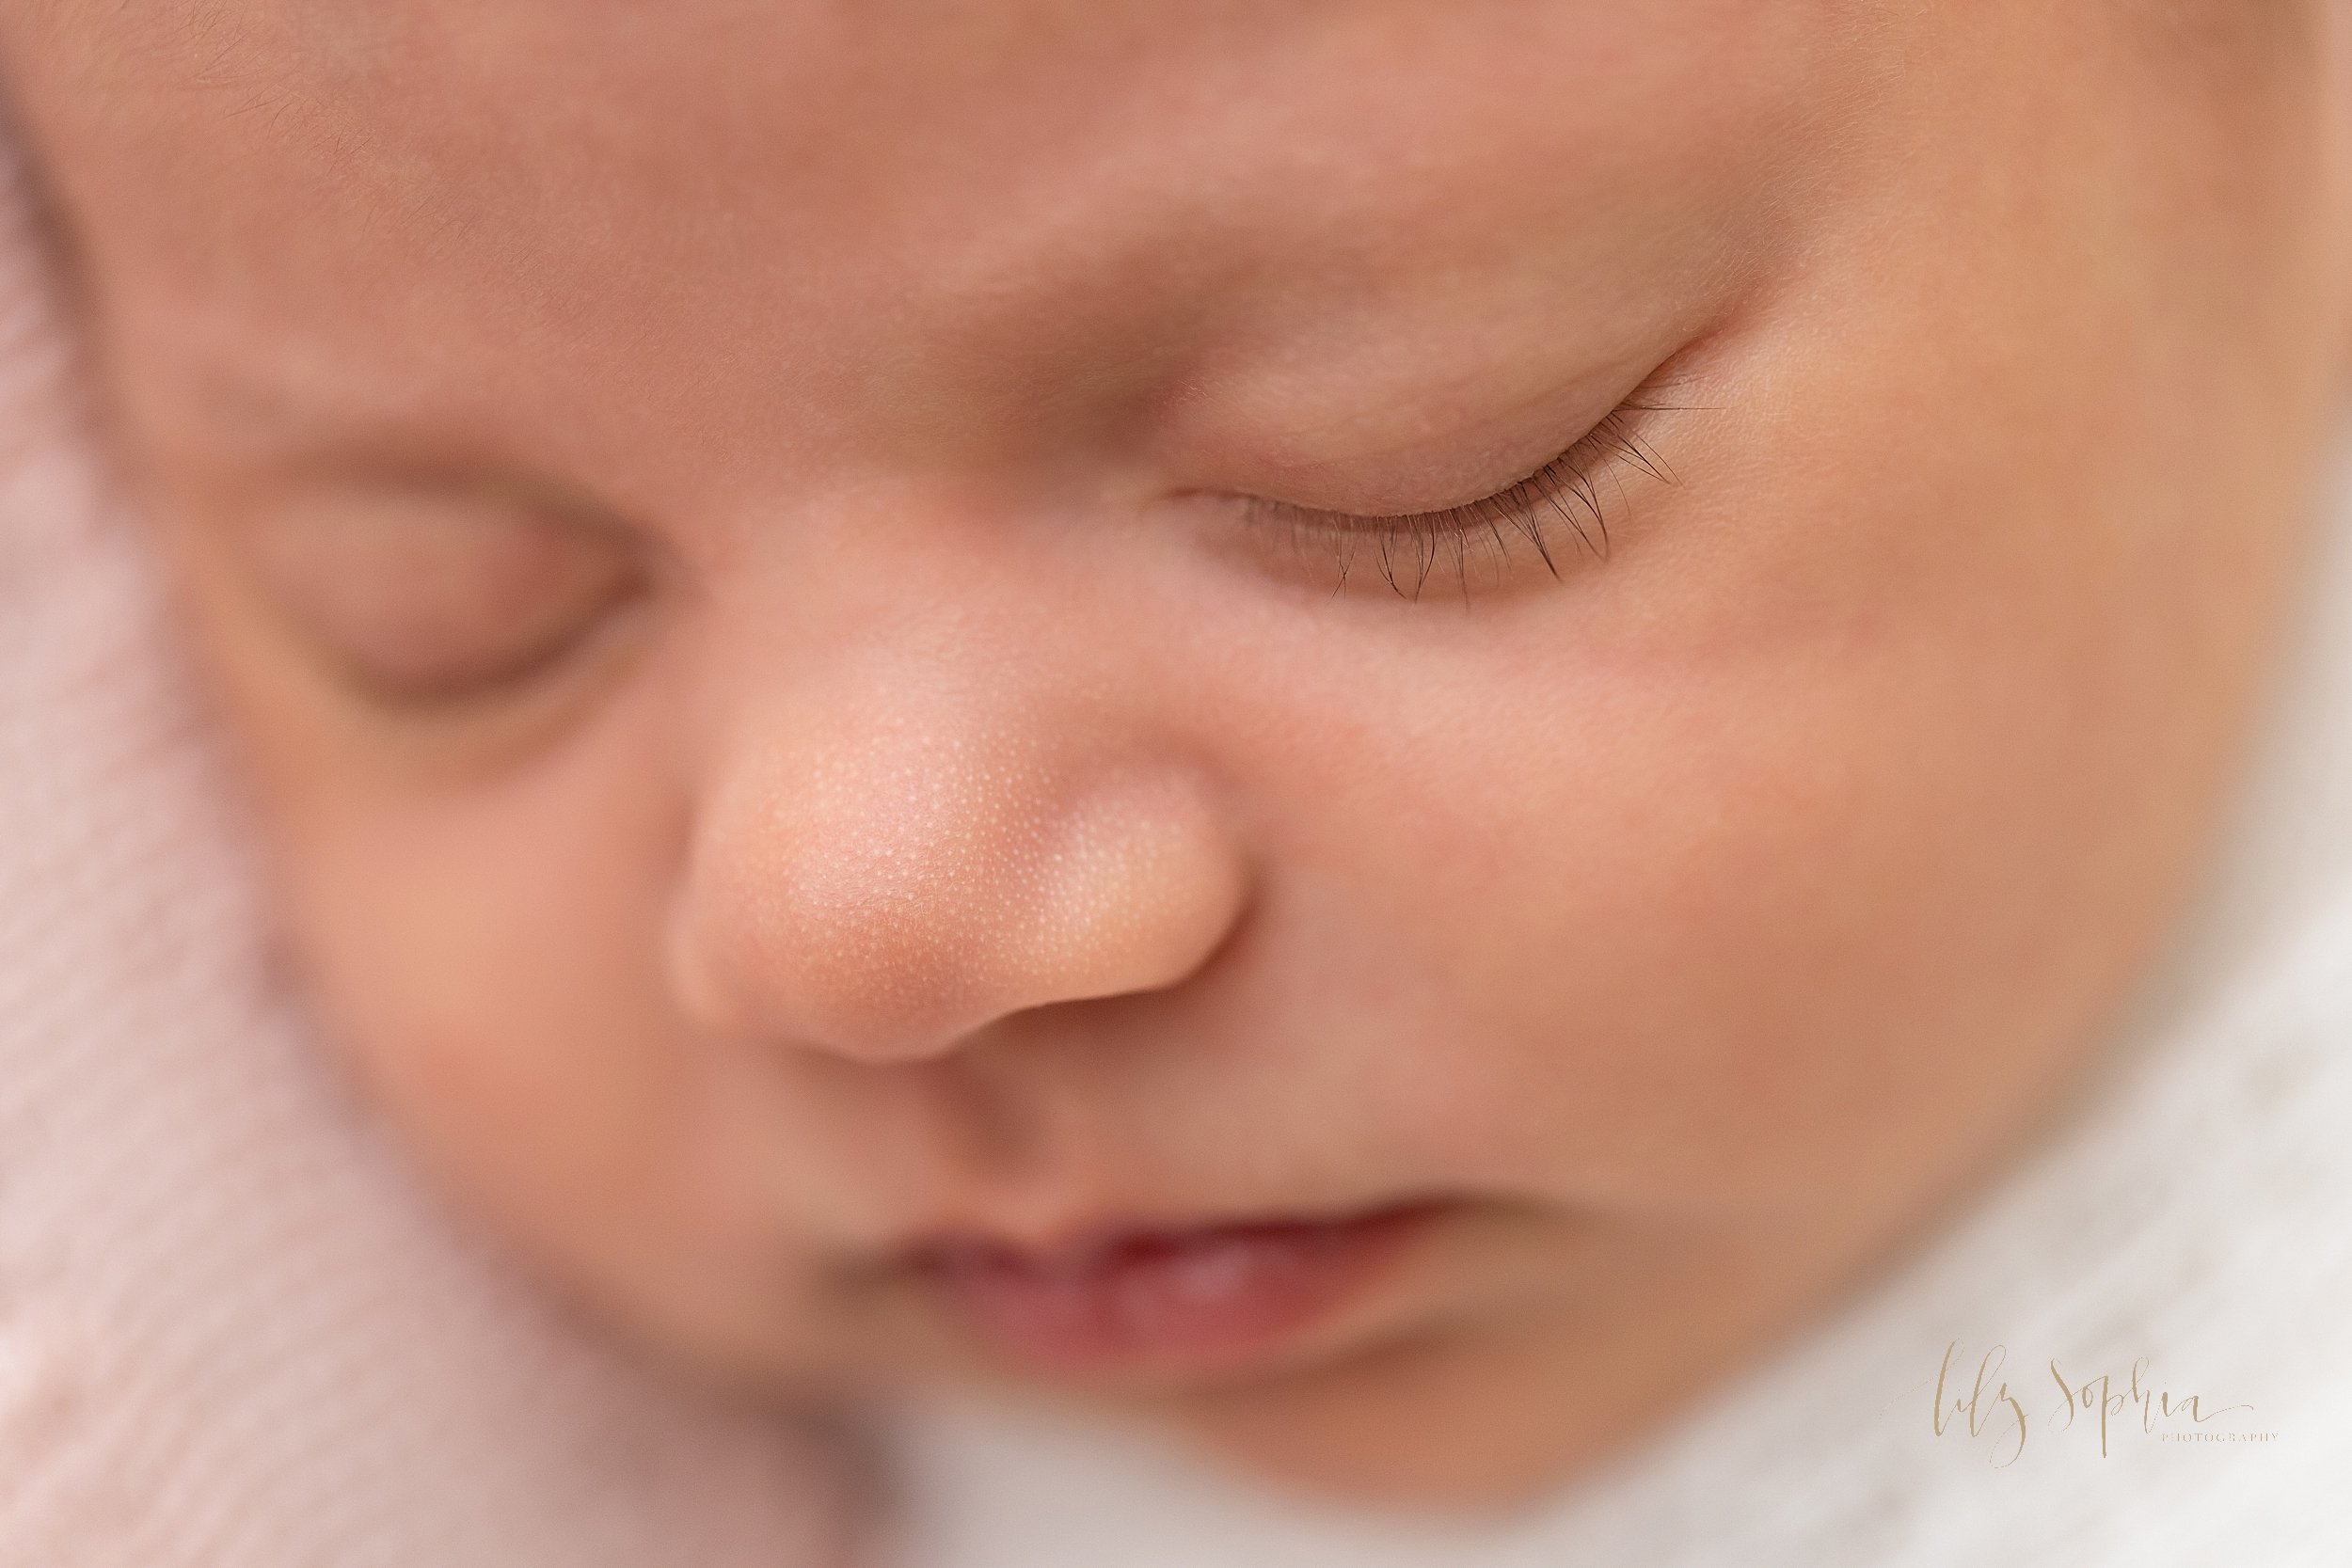  Close-up newborn portrait of the face of a peacefully sleeping baby girl that highlights her button nose, wispy eyelashes, and milky lips taken using natural light near Vinings, Georgia in a studio. 